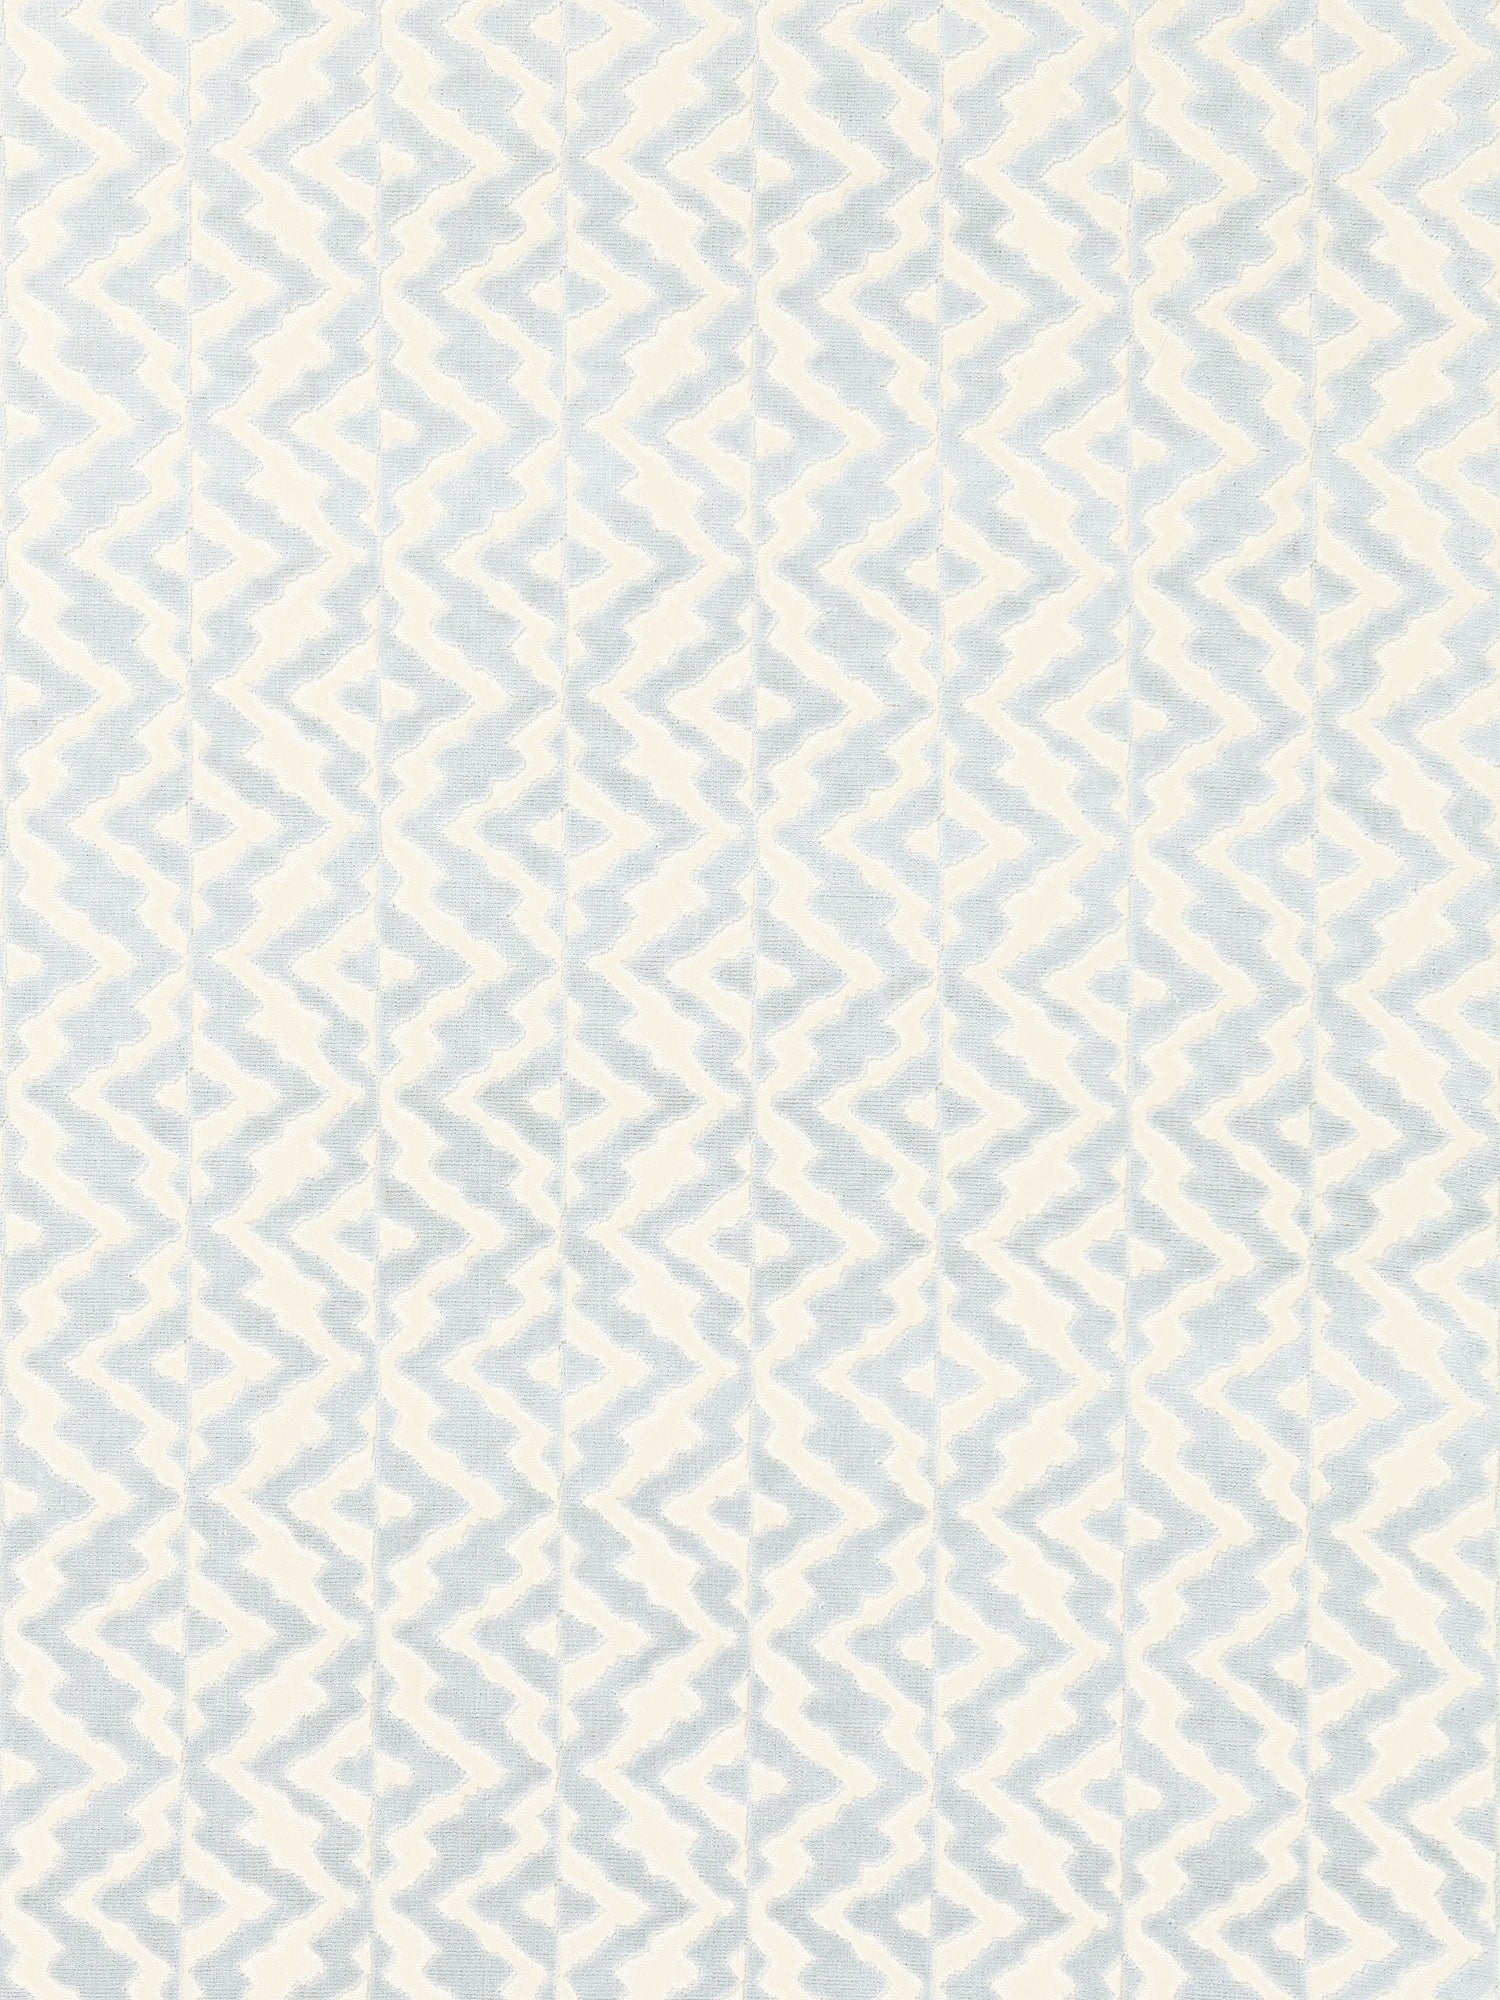 Echo Velvet fabric in cloud color - pattern number SC 000127085 - by Scalamandre in the Scalamandre Fabrics Book 1 collection